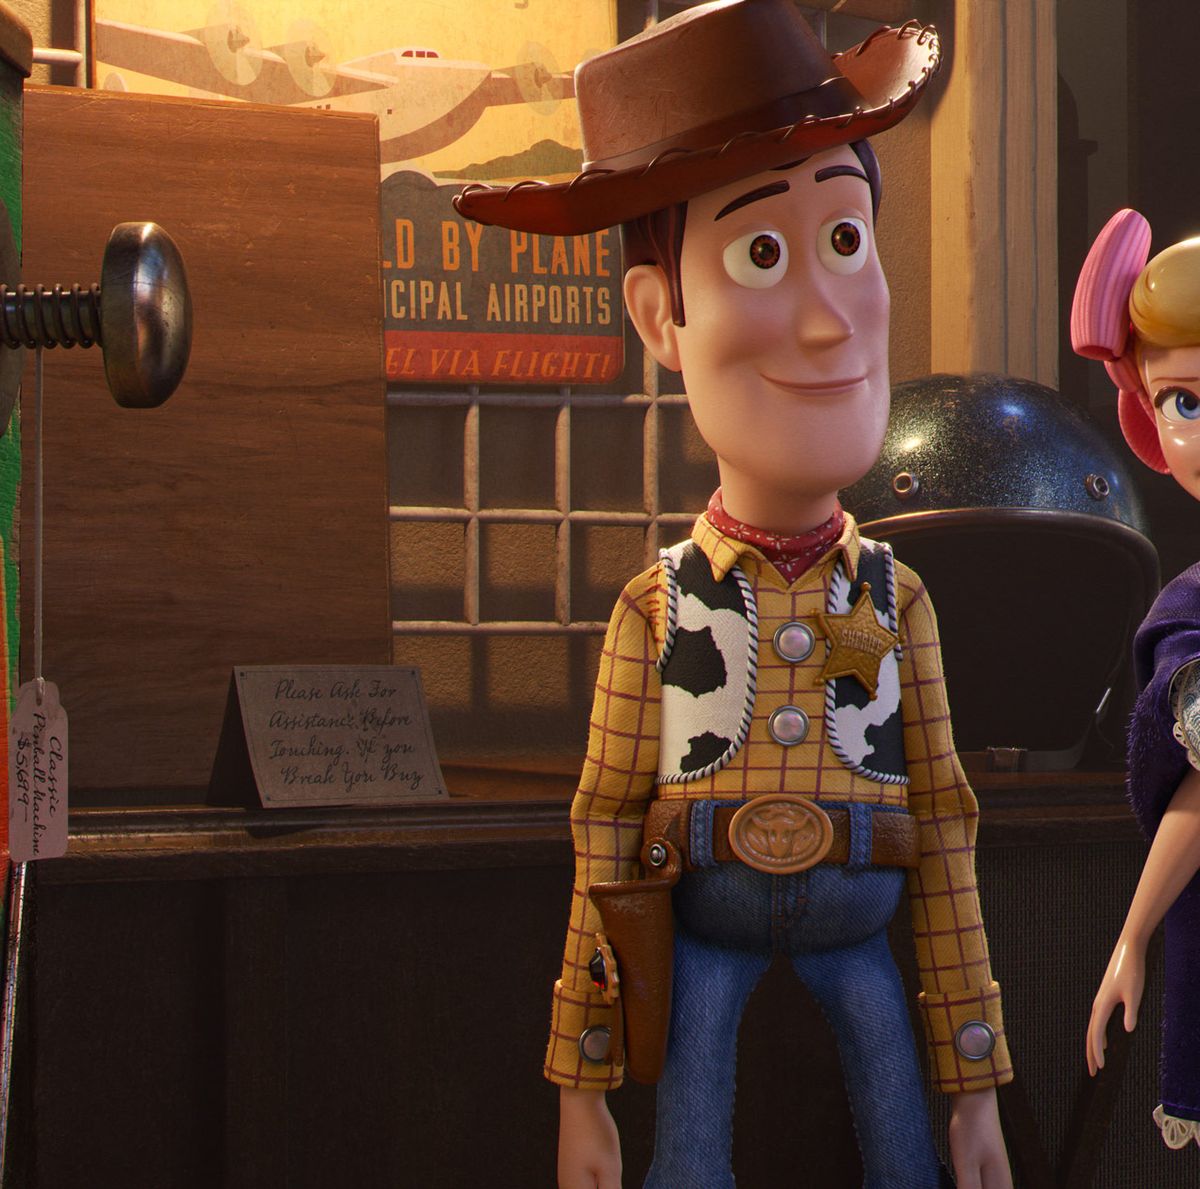 Toy Story 5, Frozen 3 and More Are Coming Soon – The Viewpoint